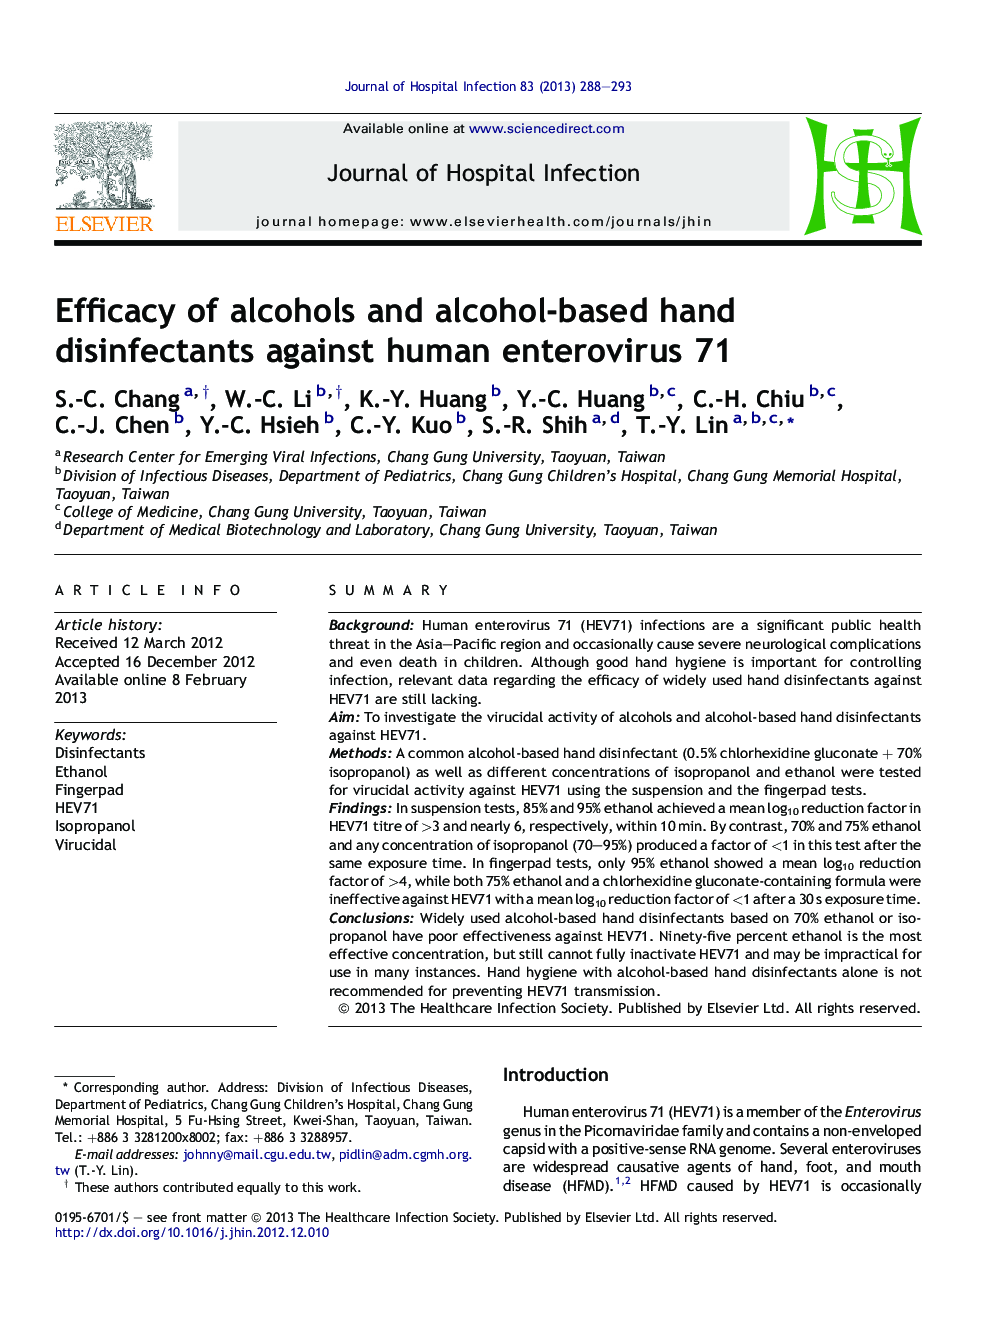 Efficacy of alcohols and alcohol-based hand disinfectants against human enterovirus 71